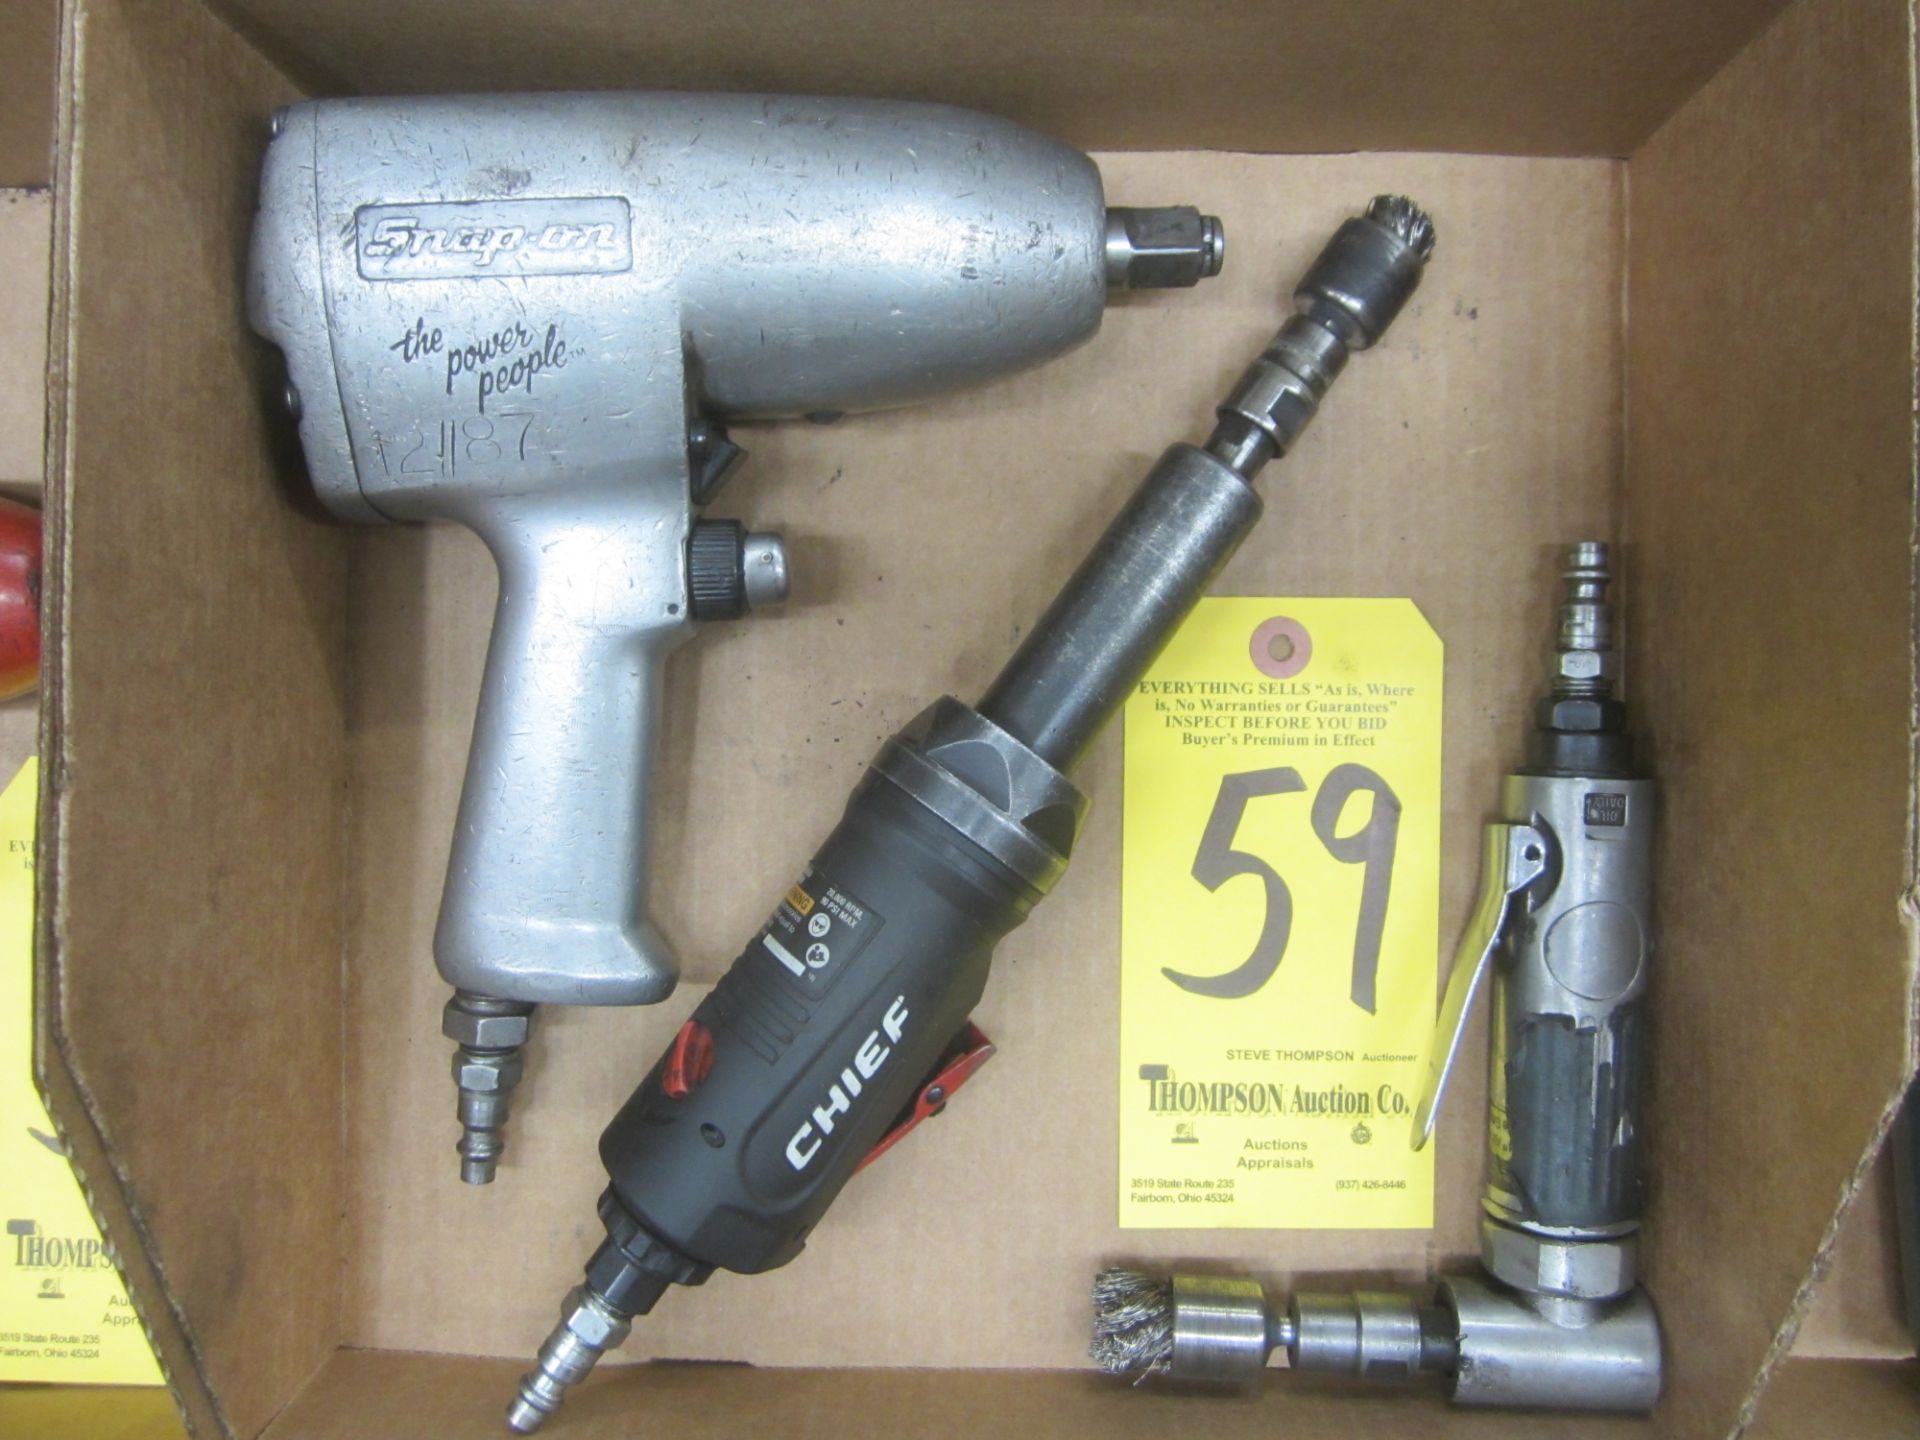 Snap-On 1/2" Drive Pneumatic Impact and (2) Pneumatic Grinders